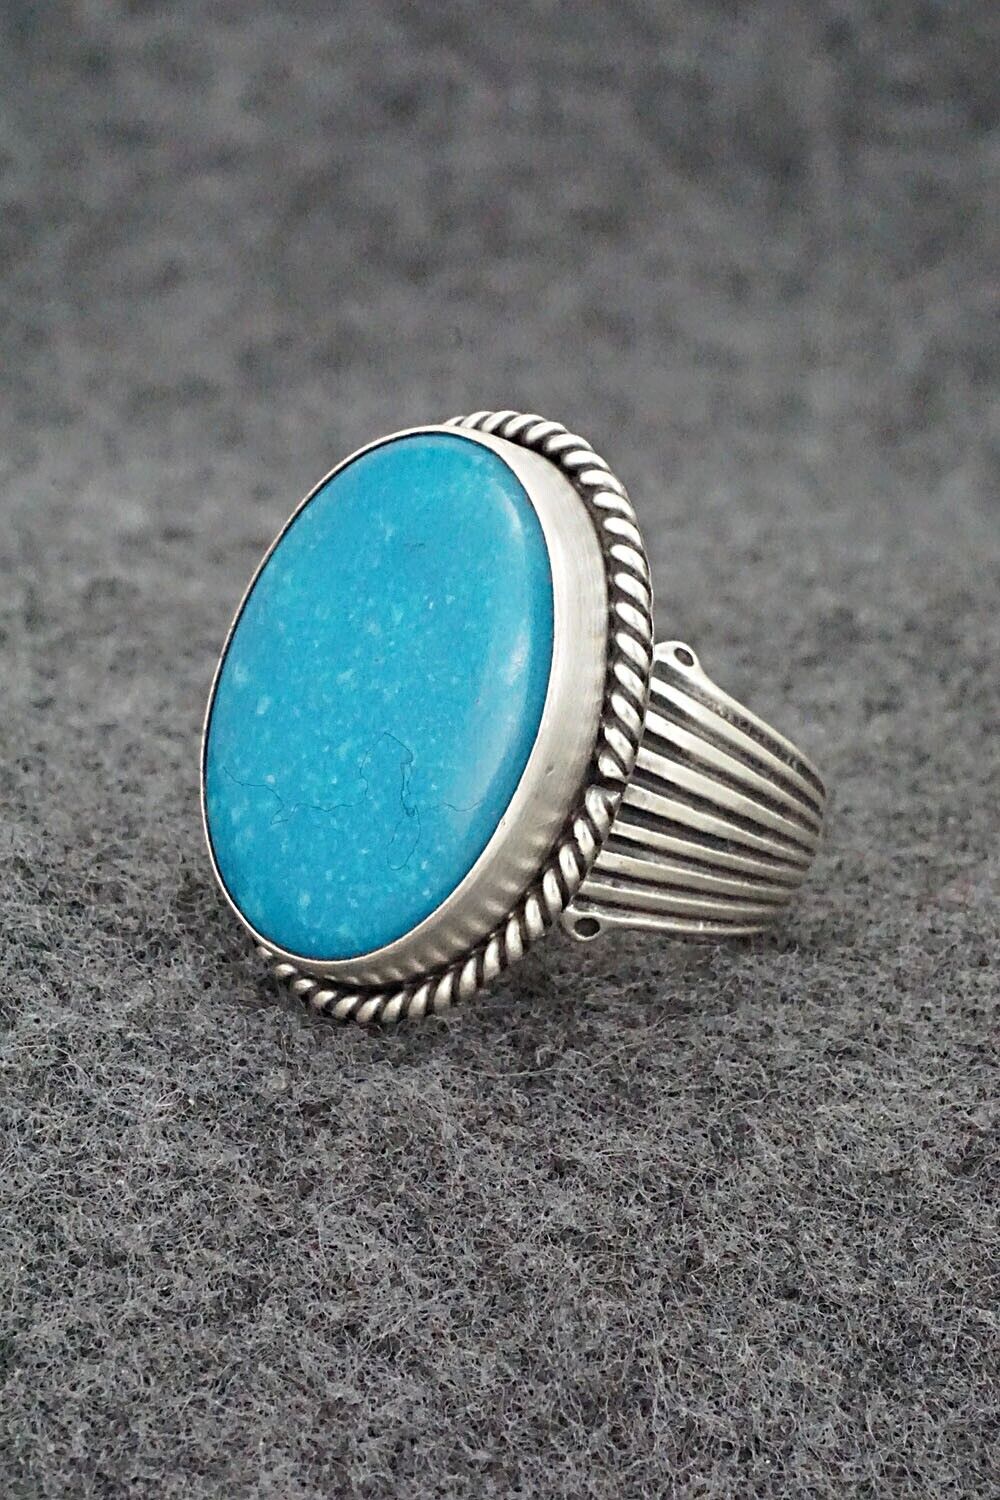 Turquoise & Sterling Silver Ring - Samuel Yellowhair - Size 7.75